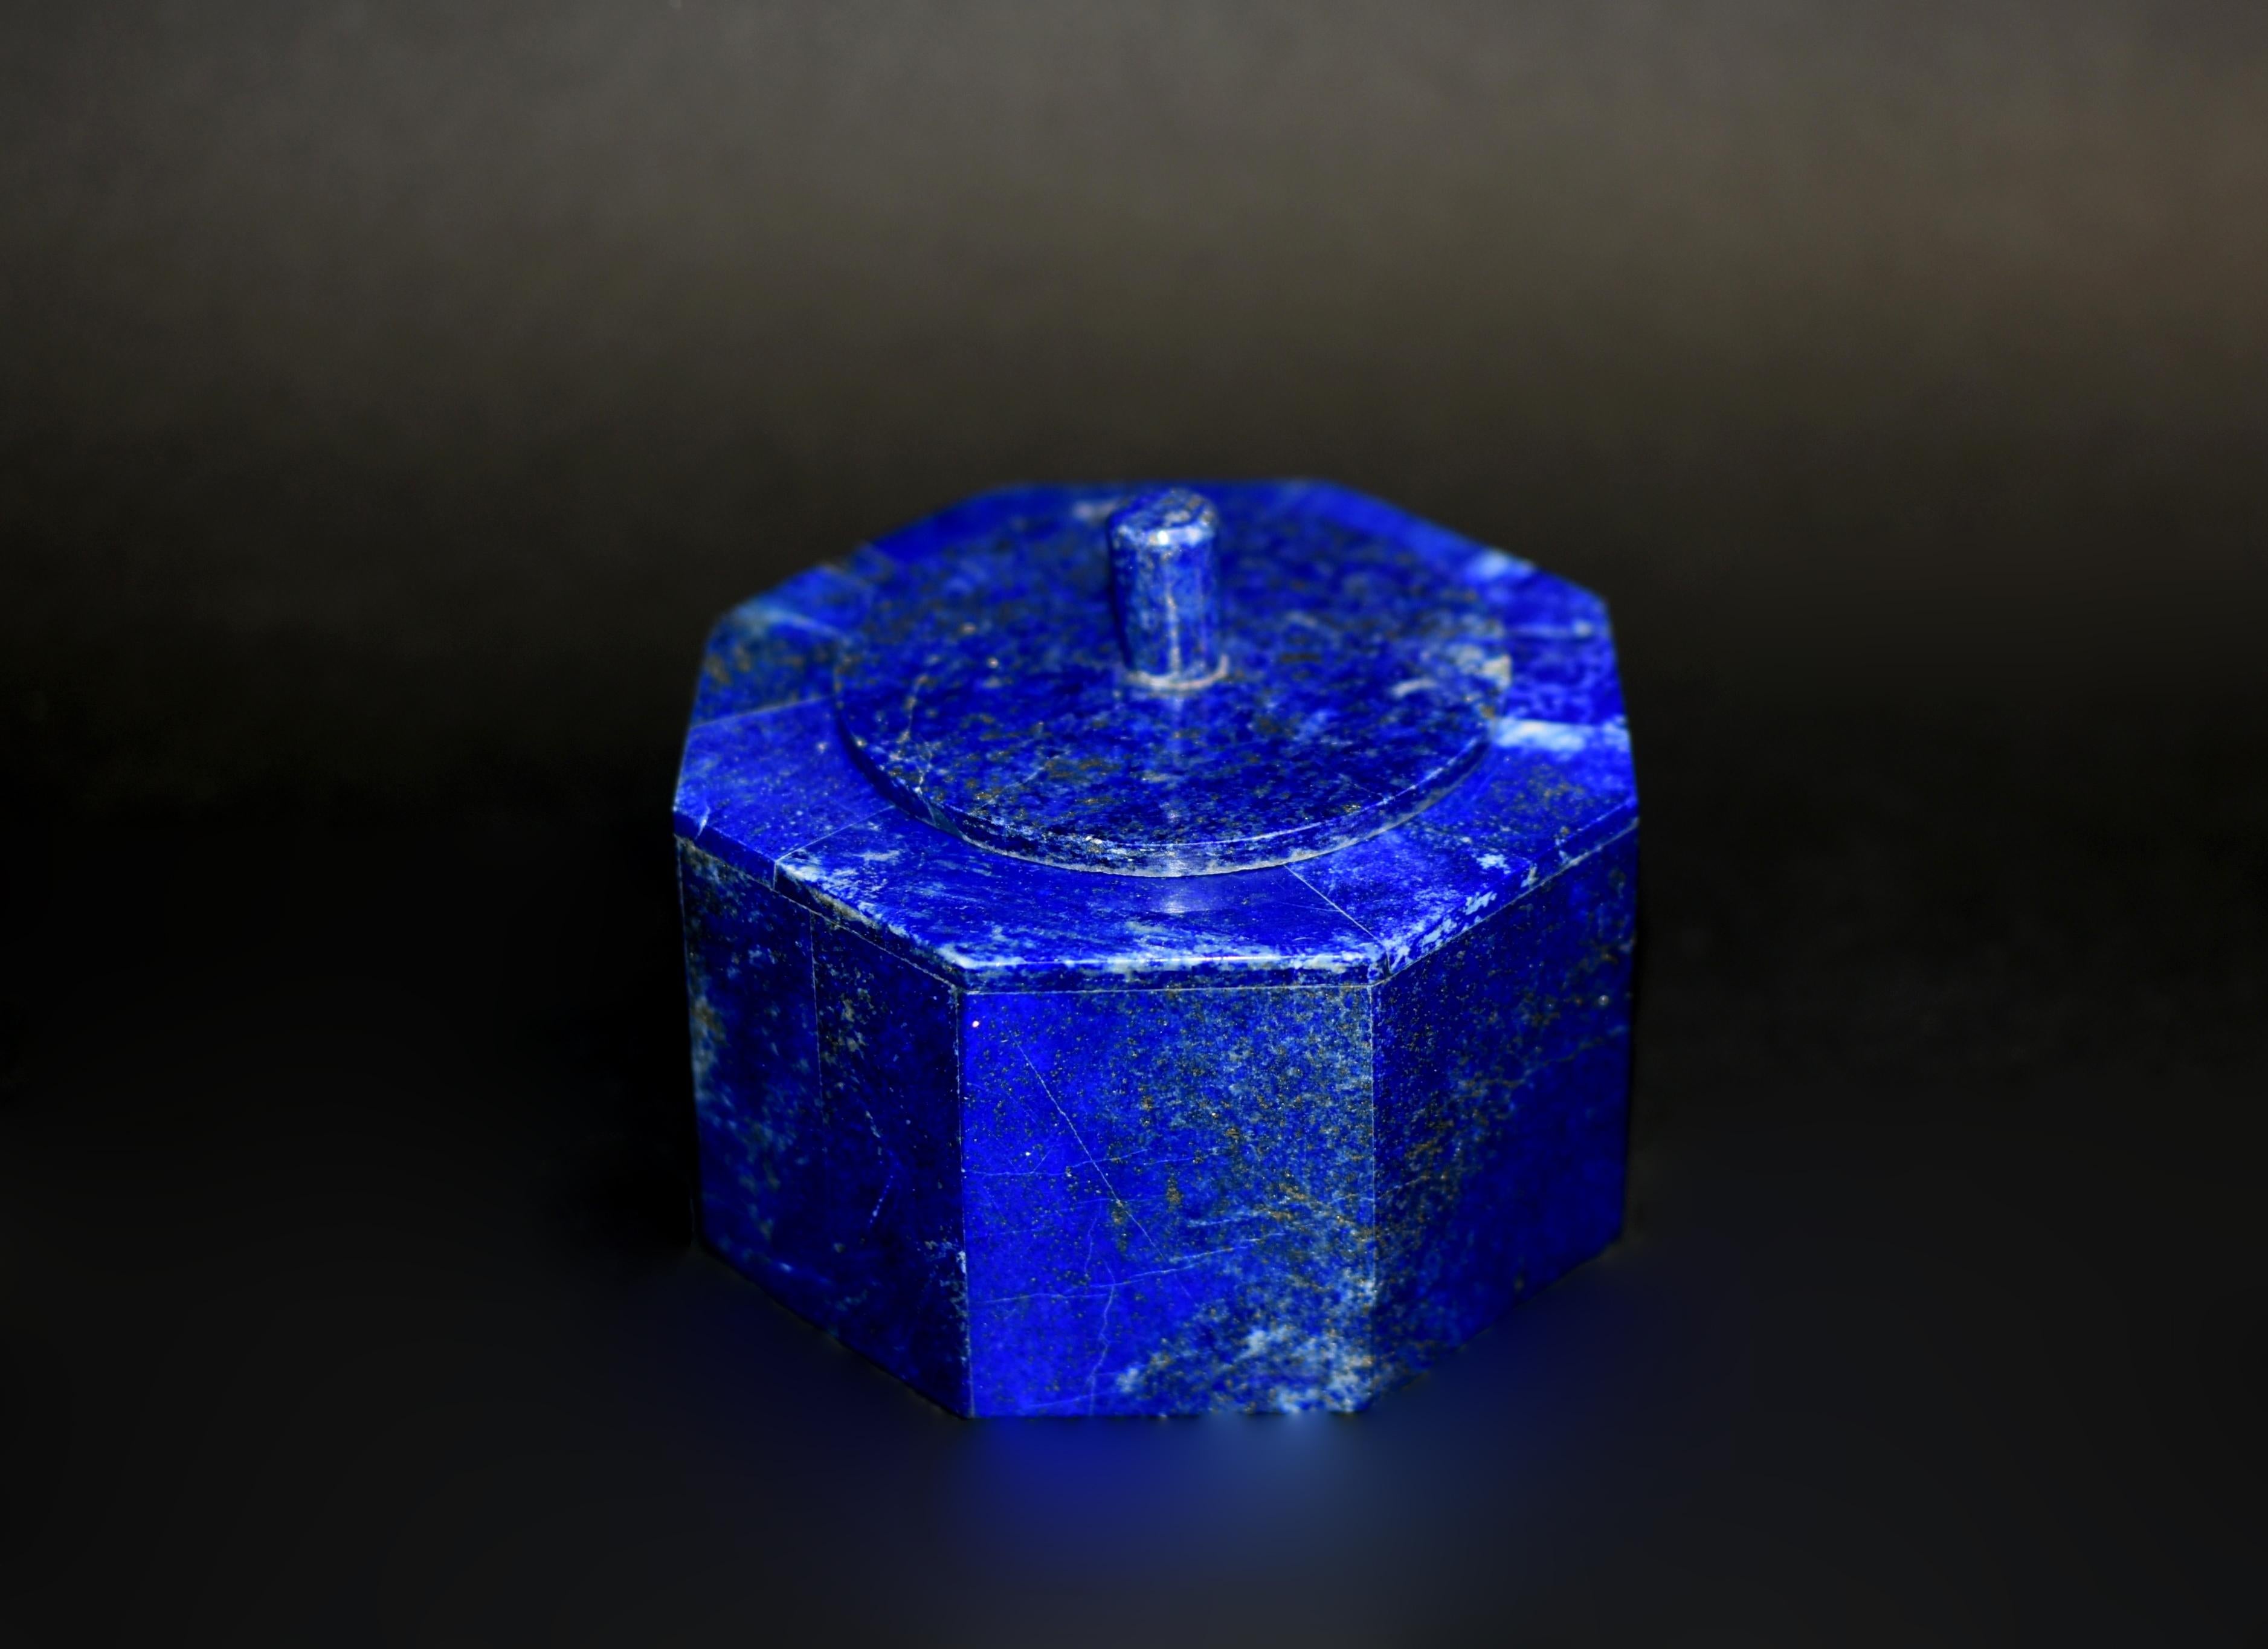 Beautiful 2.2 lb octagonal boxes made of the finest, grade AAA natural lapis lazuli.. Round lid with elegant finial and fine carrara marble interior. High percentage of Lazurite mineral gives the boxes the stunning, saturated blue color. Beautiful